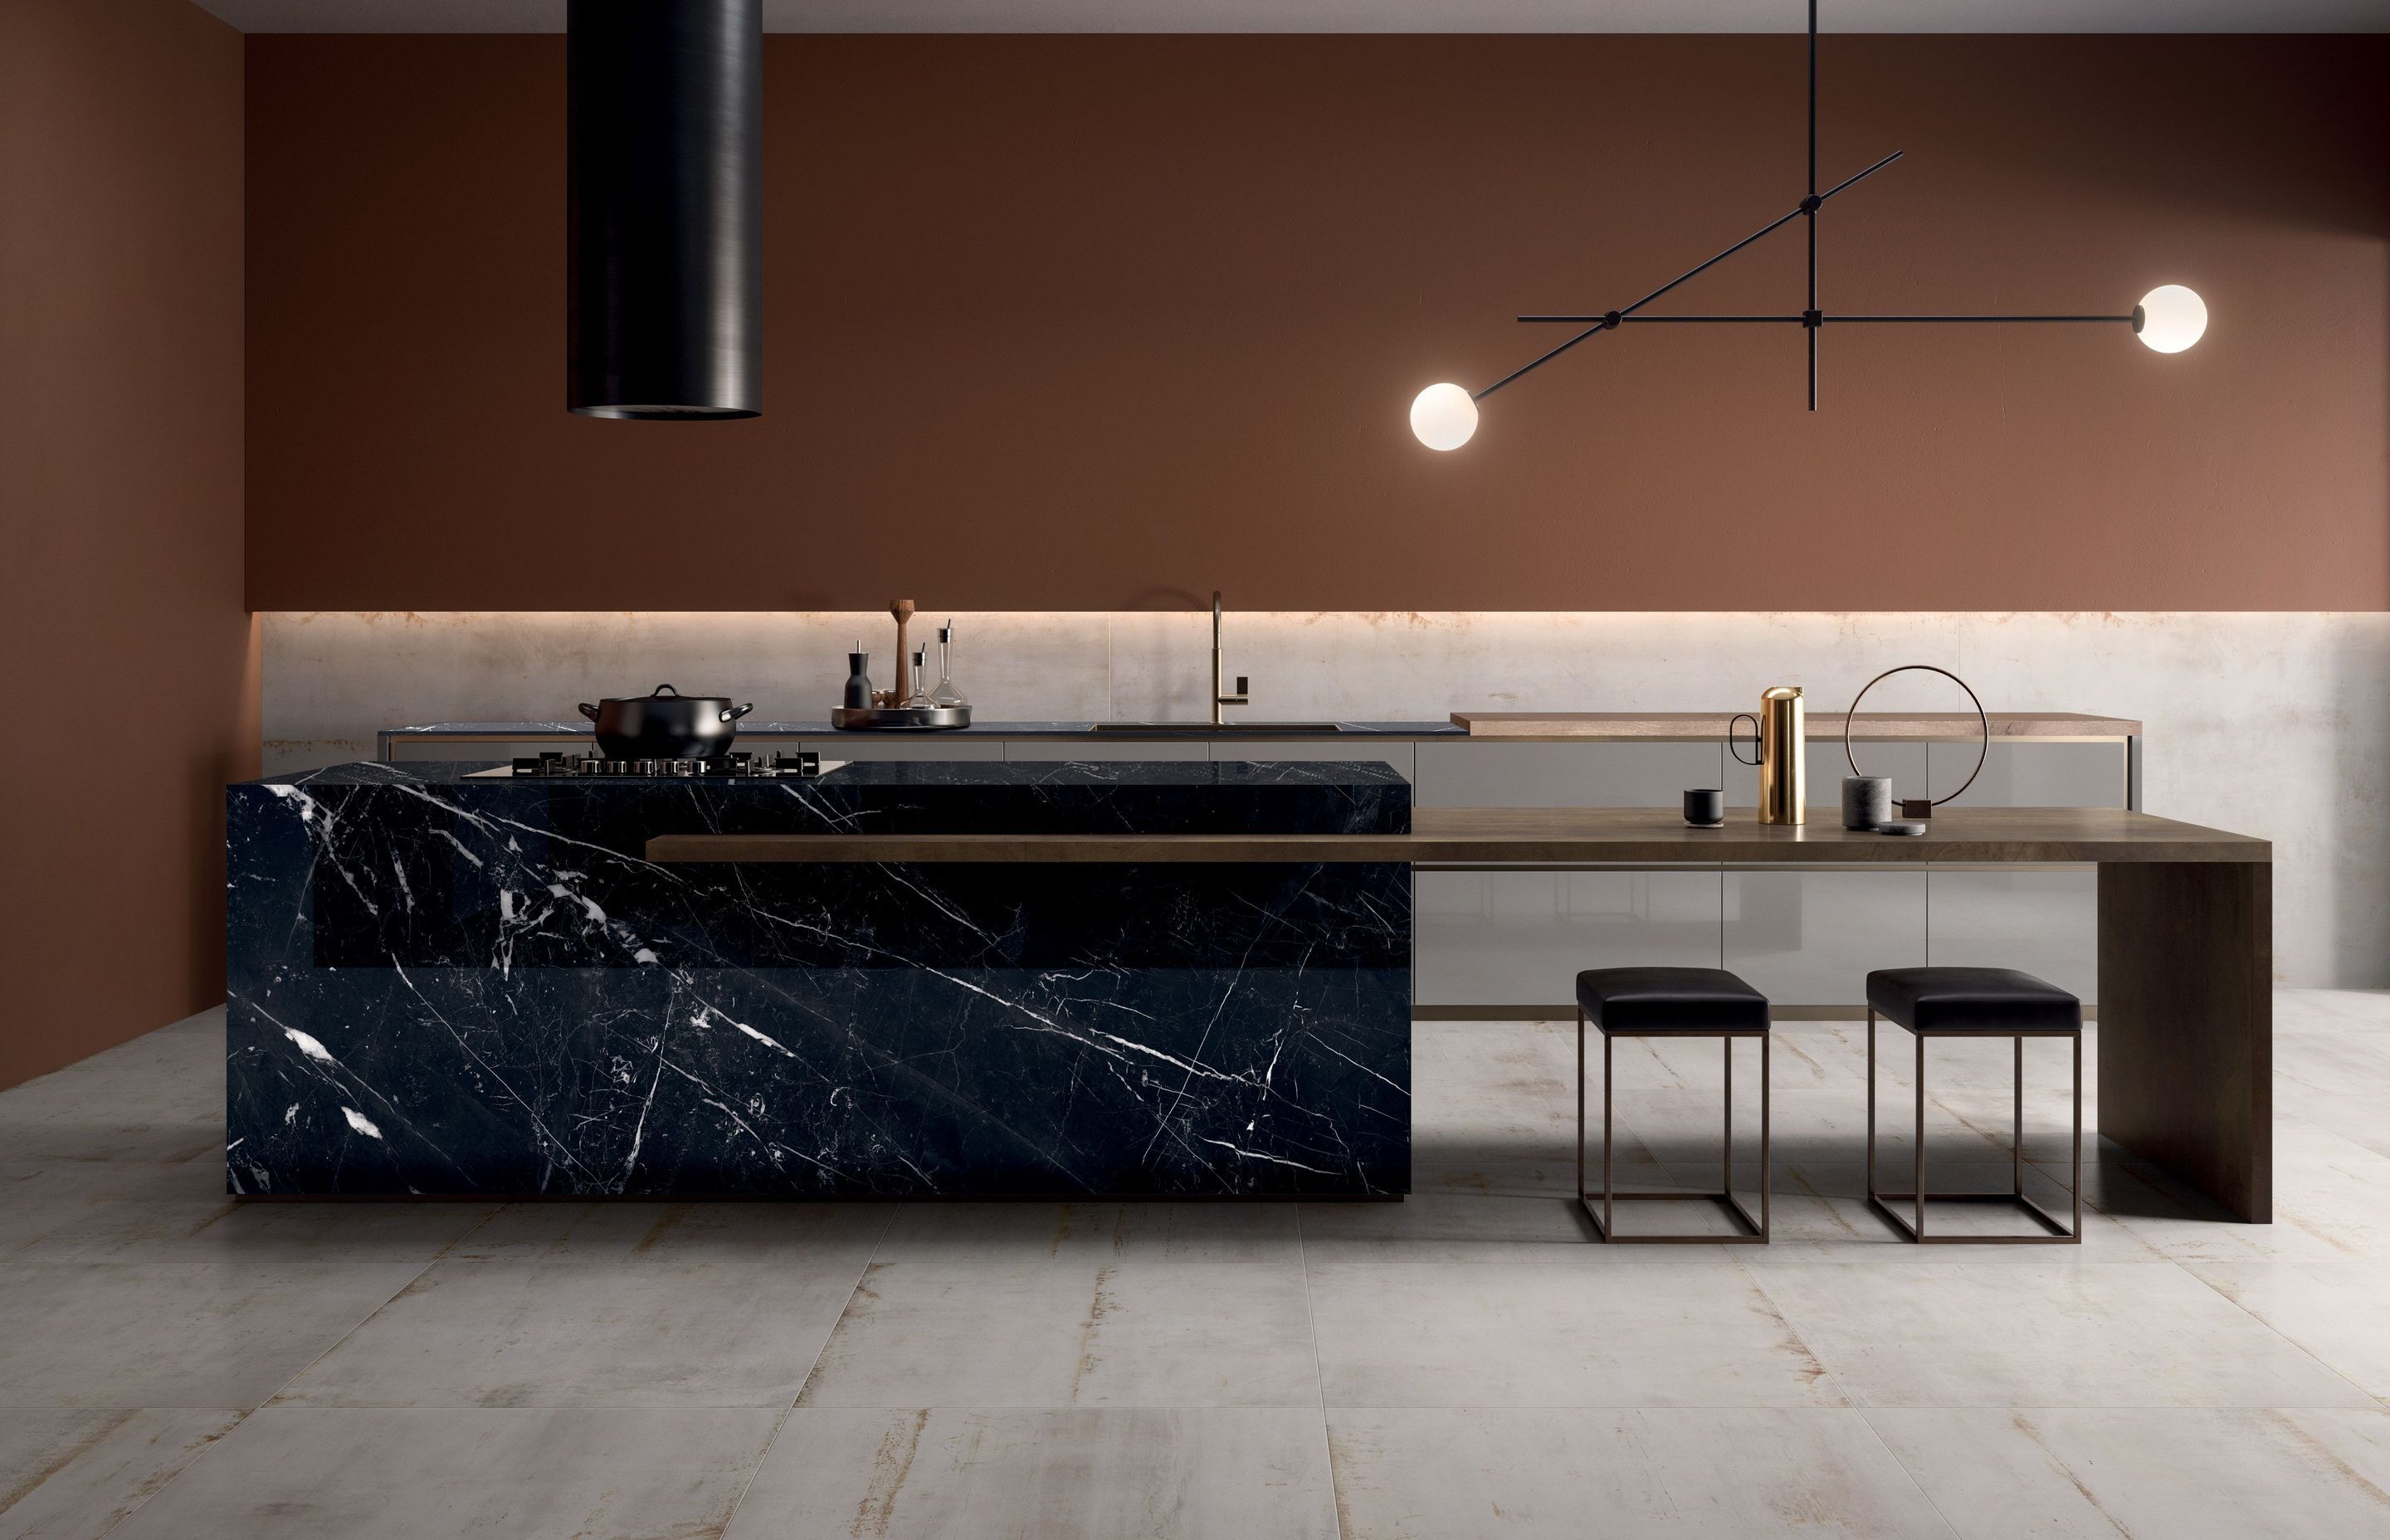 The sintered process of the porcelain slabs means they are ideal for kitchens. Hot pots and pans can be placed directly on work benches, and the surface is easy to clean.